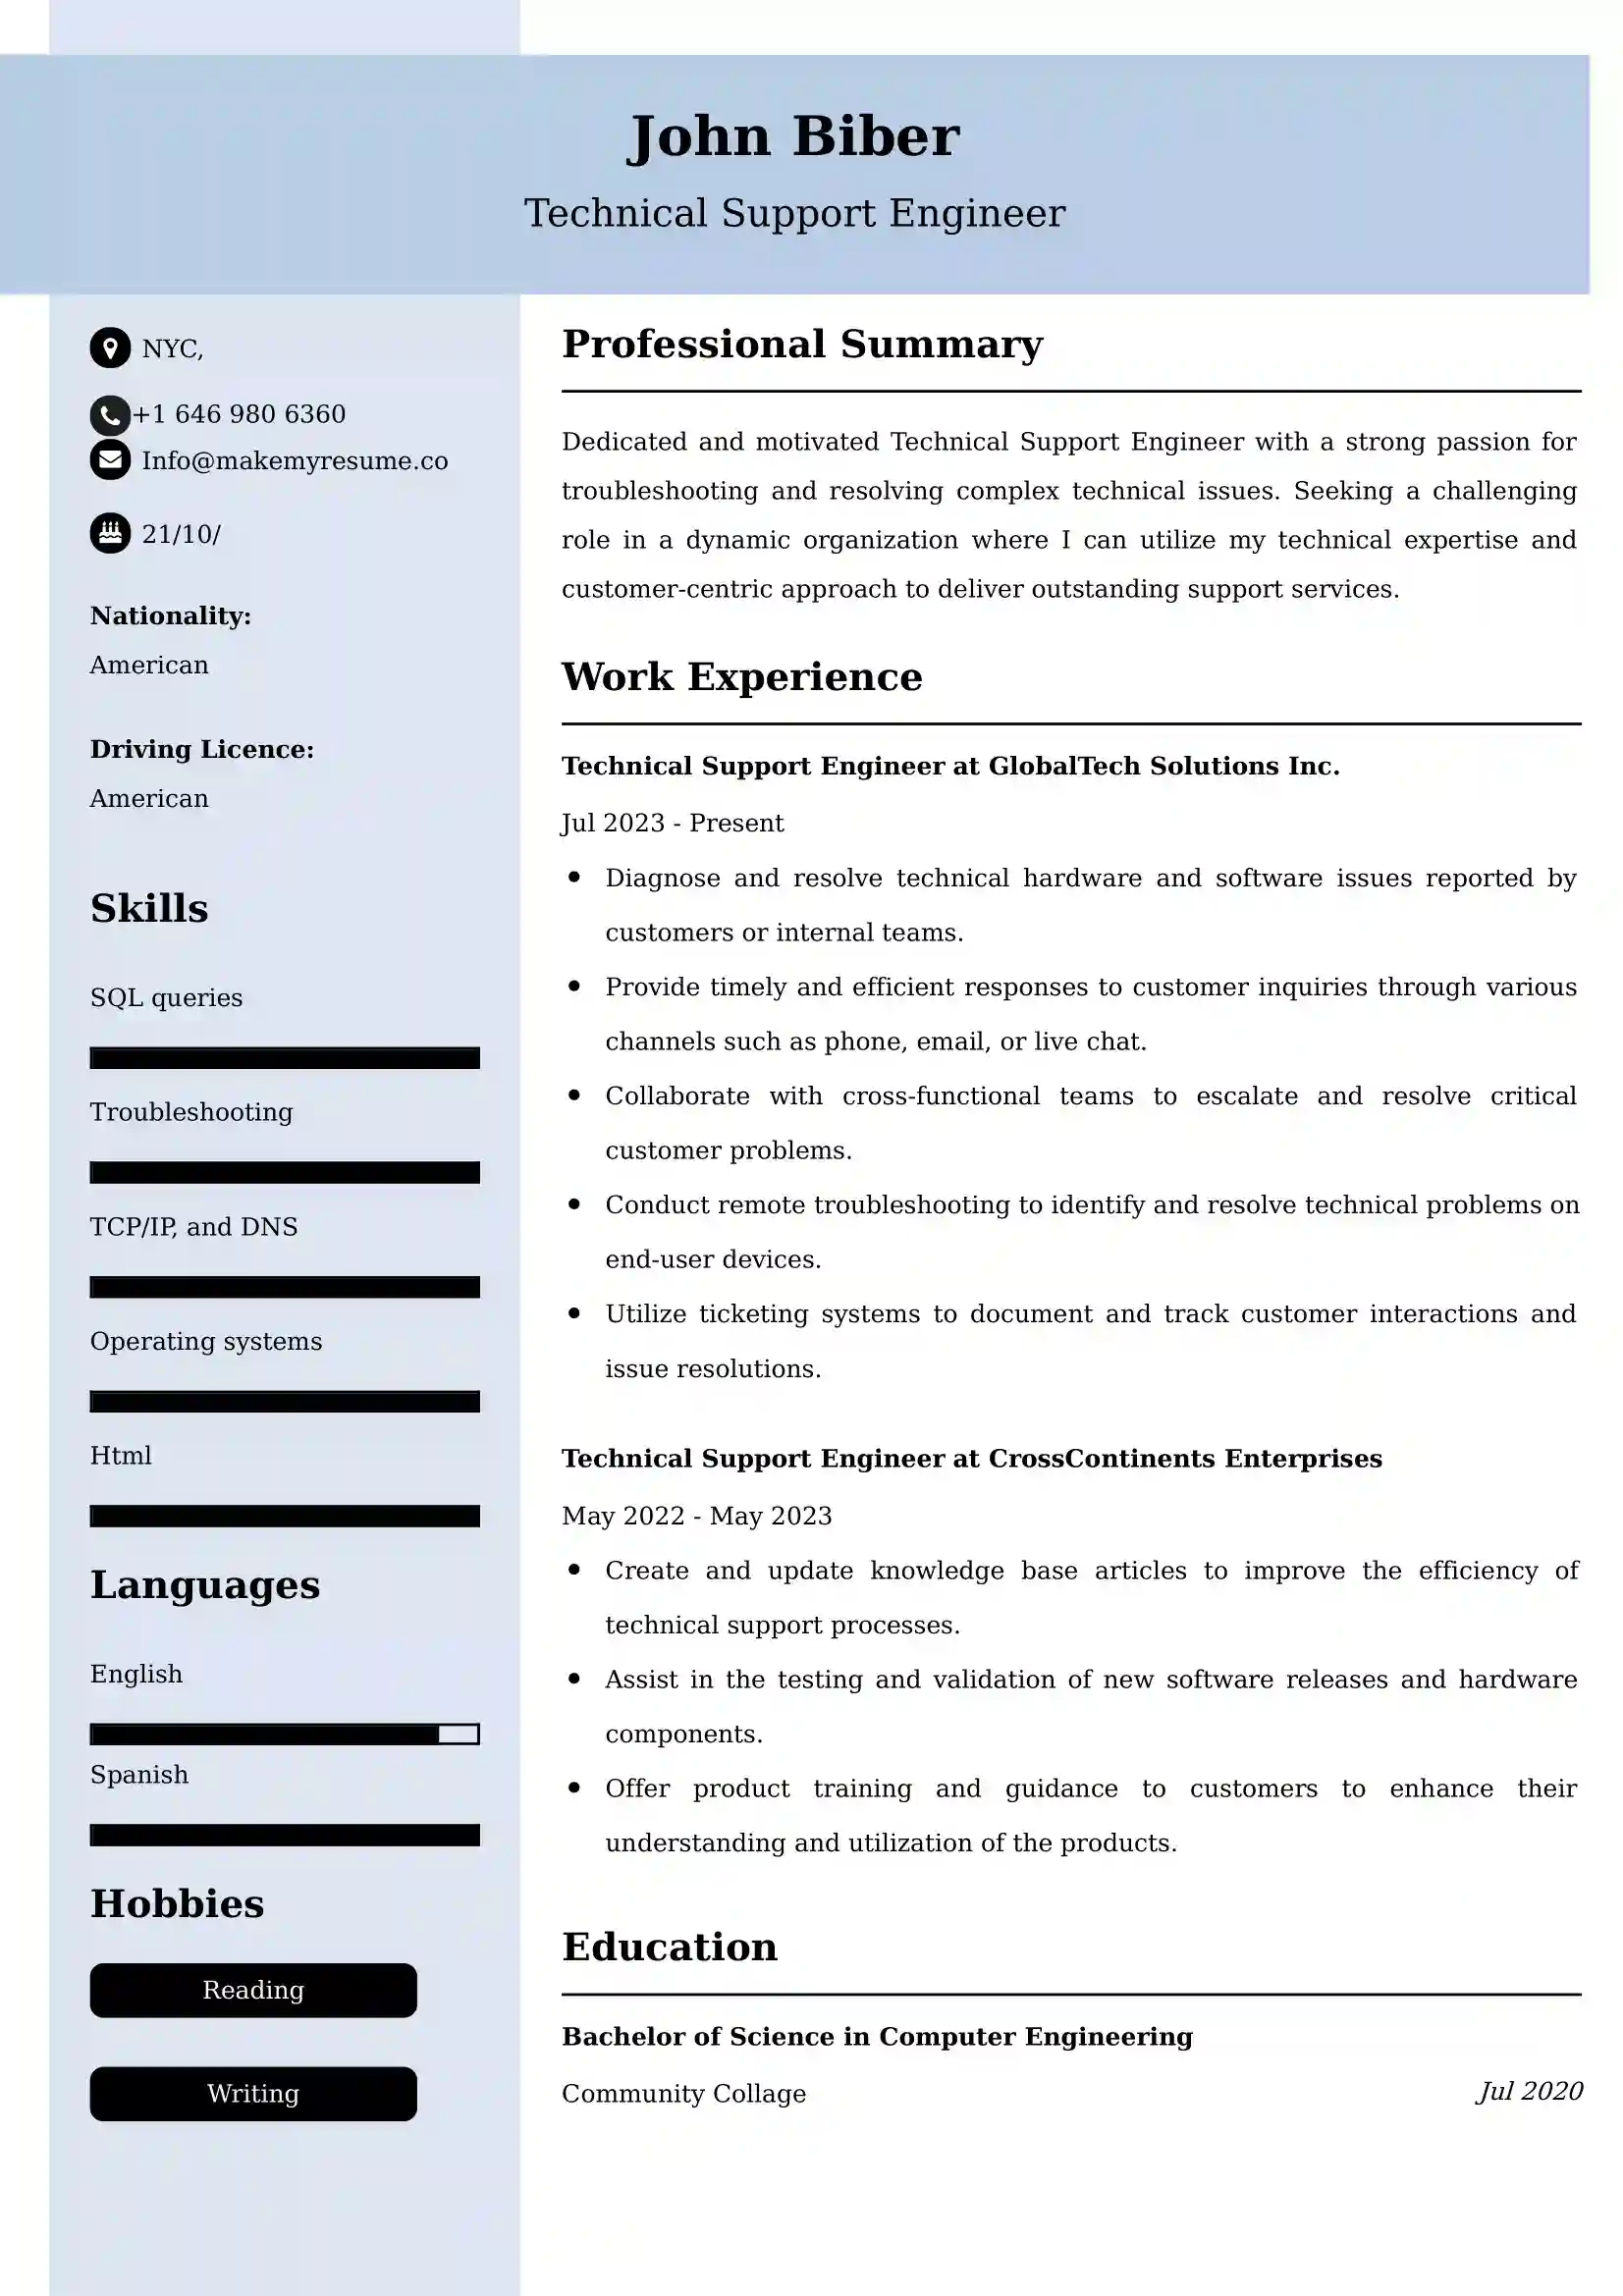 Technical Support Engineer Resume Examples USA